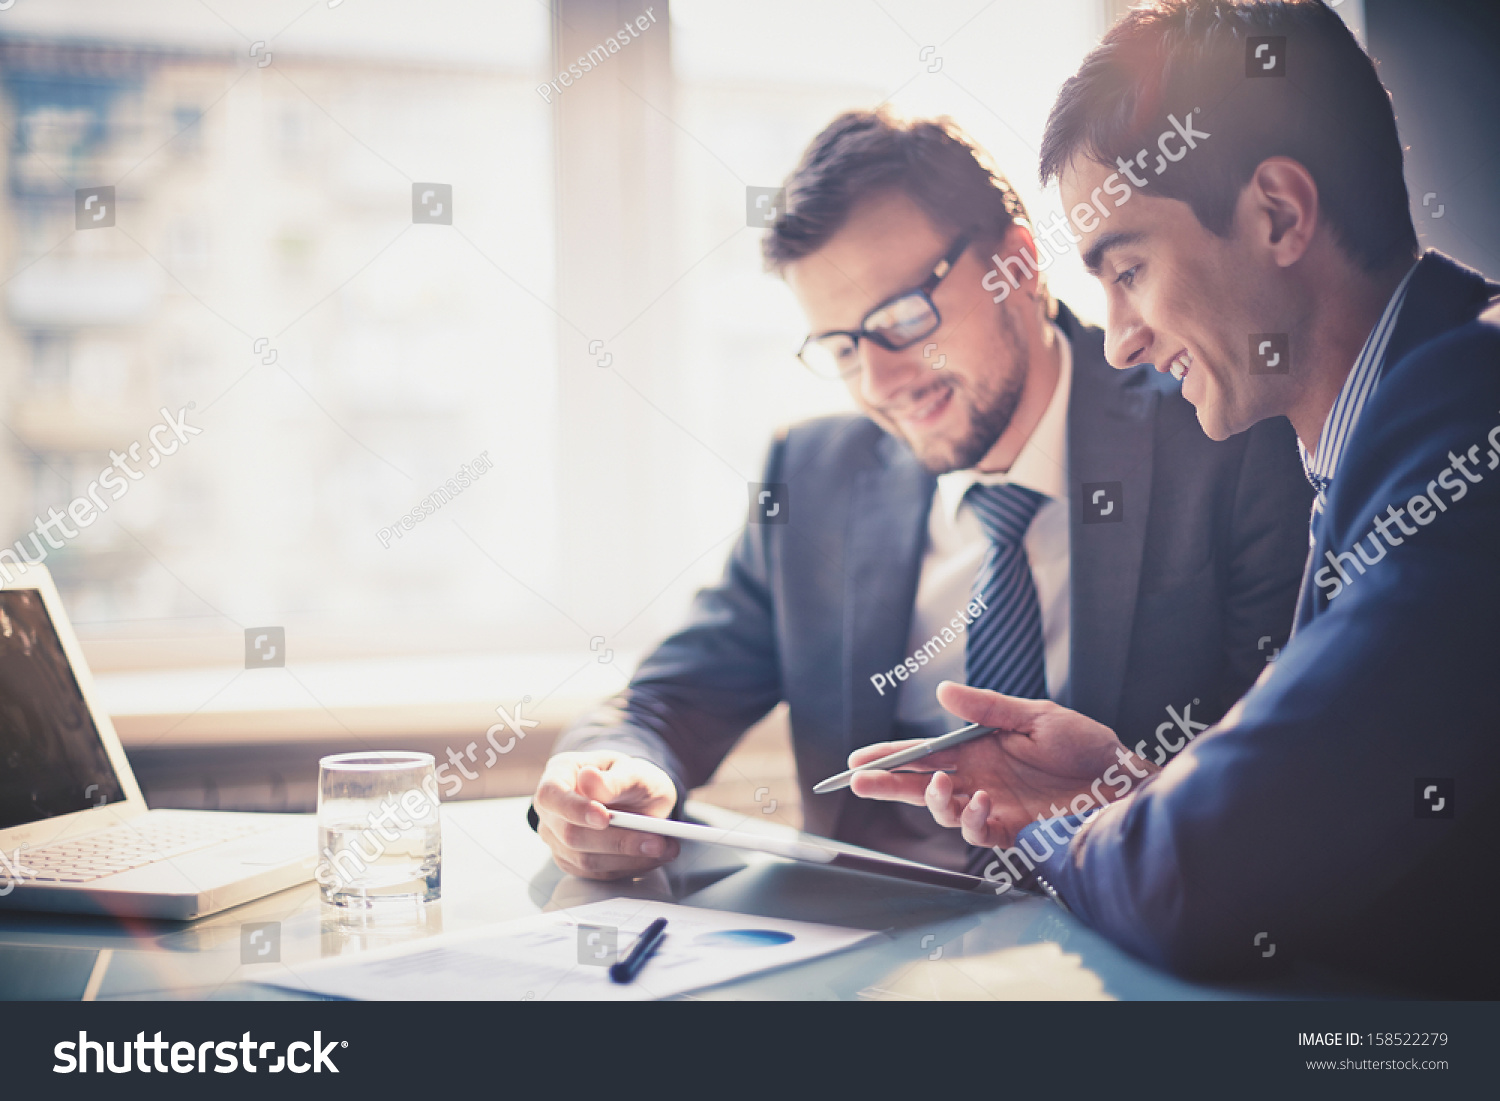 Image of two young businessmen using touchpad at meeting #158522279